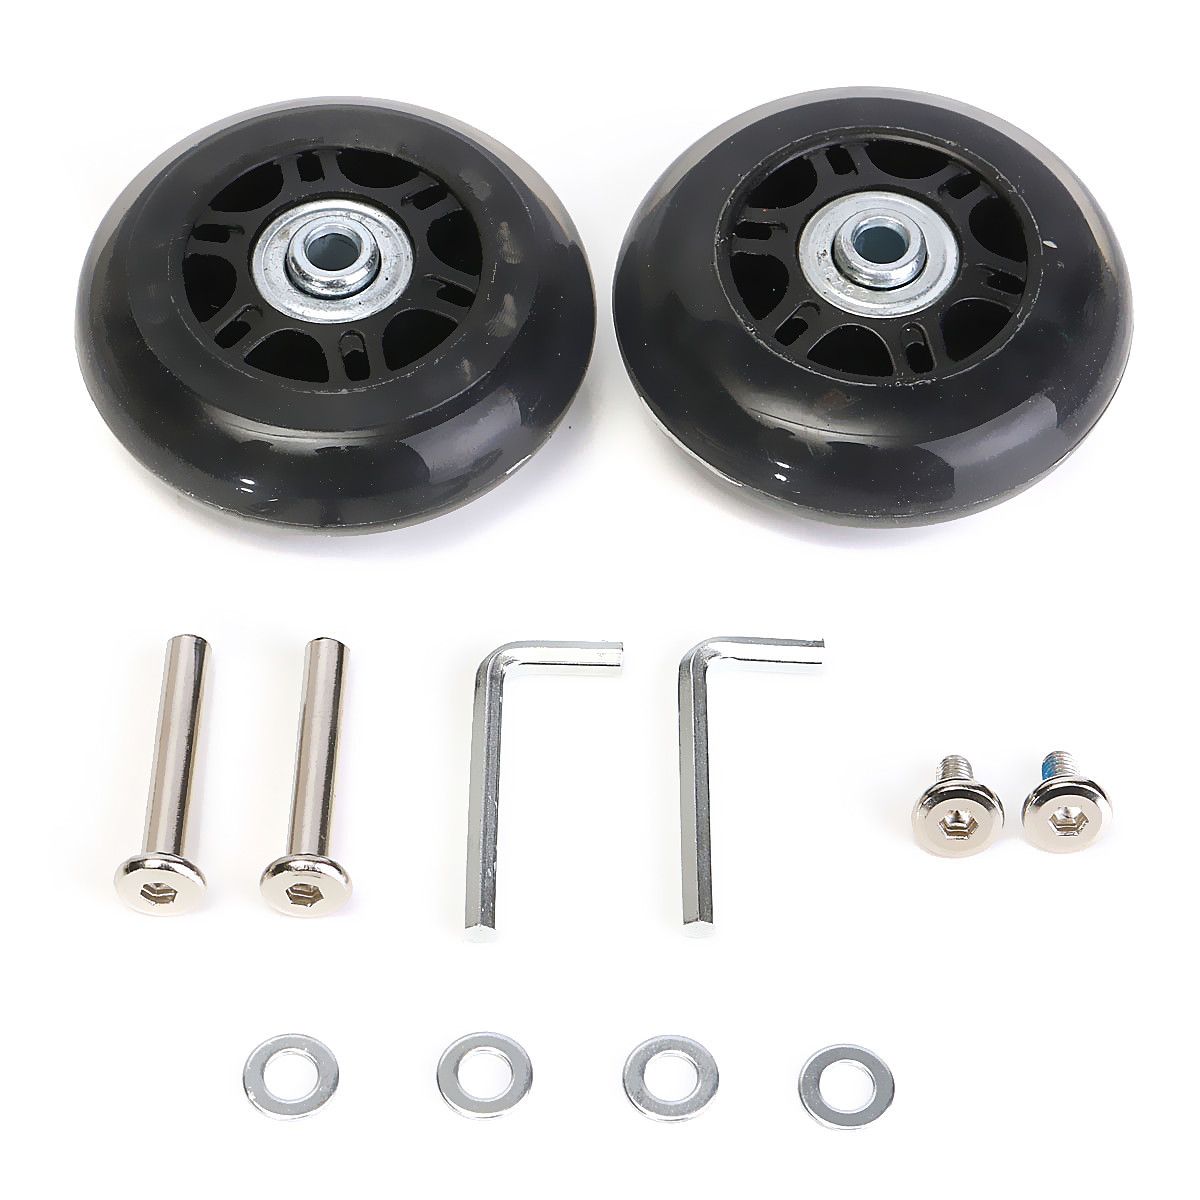 2pcs-Luggage-Suitcase-Replacement-Wheels-Axles-Deluxe-Repair-OD-70mm-1045175